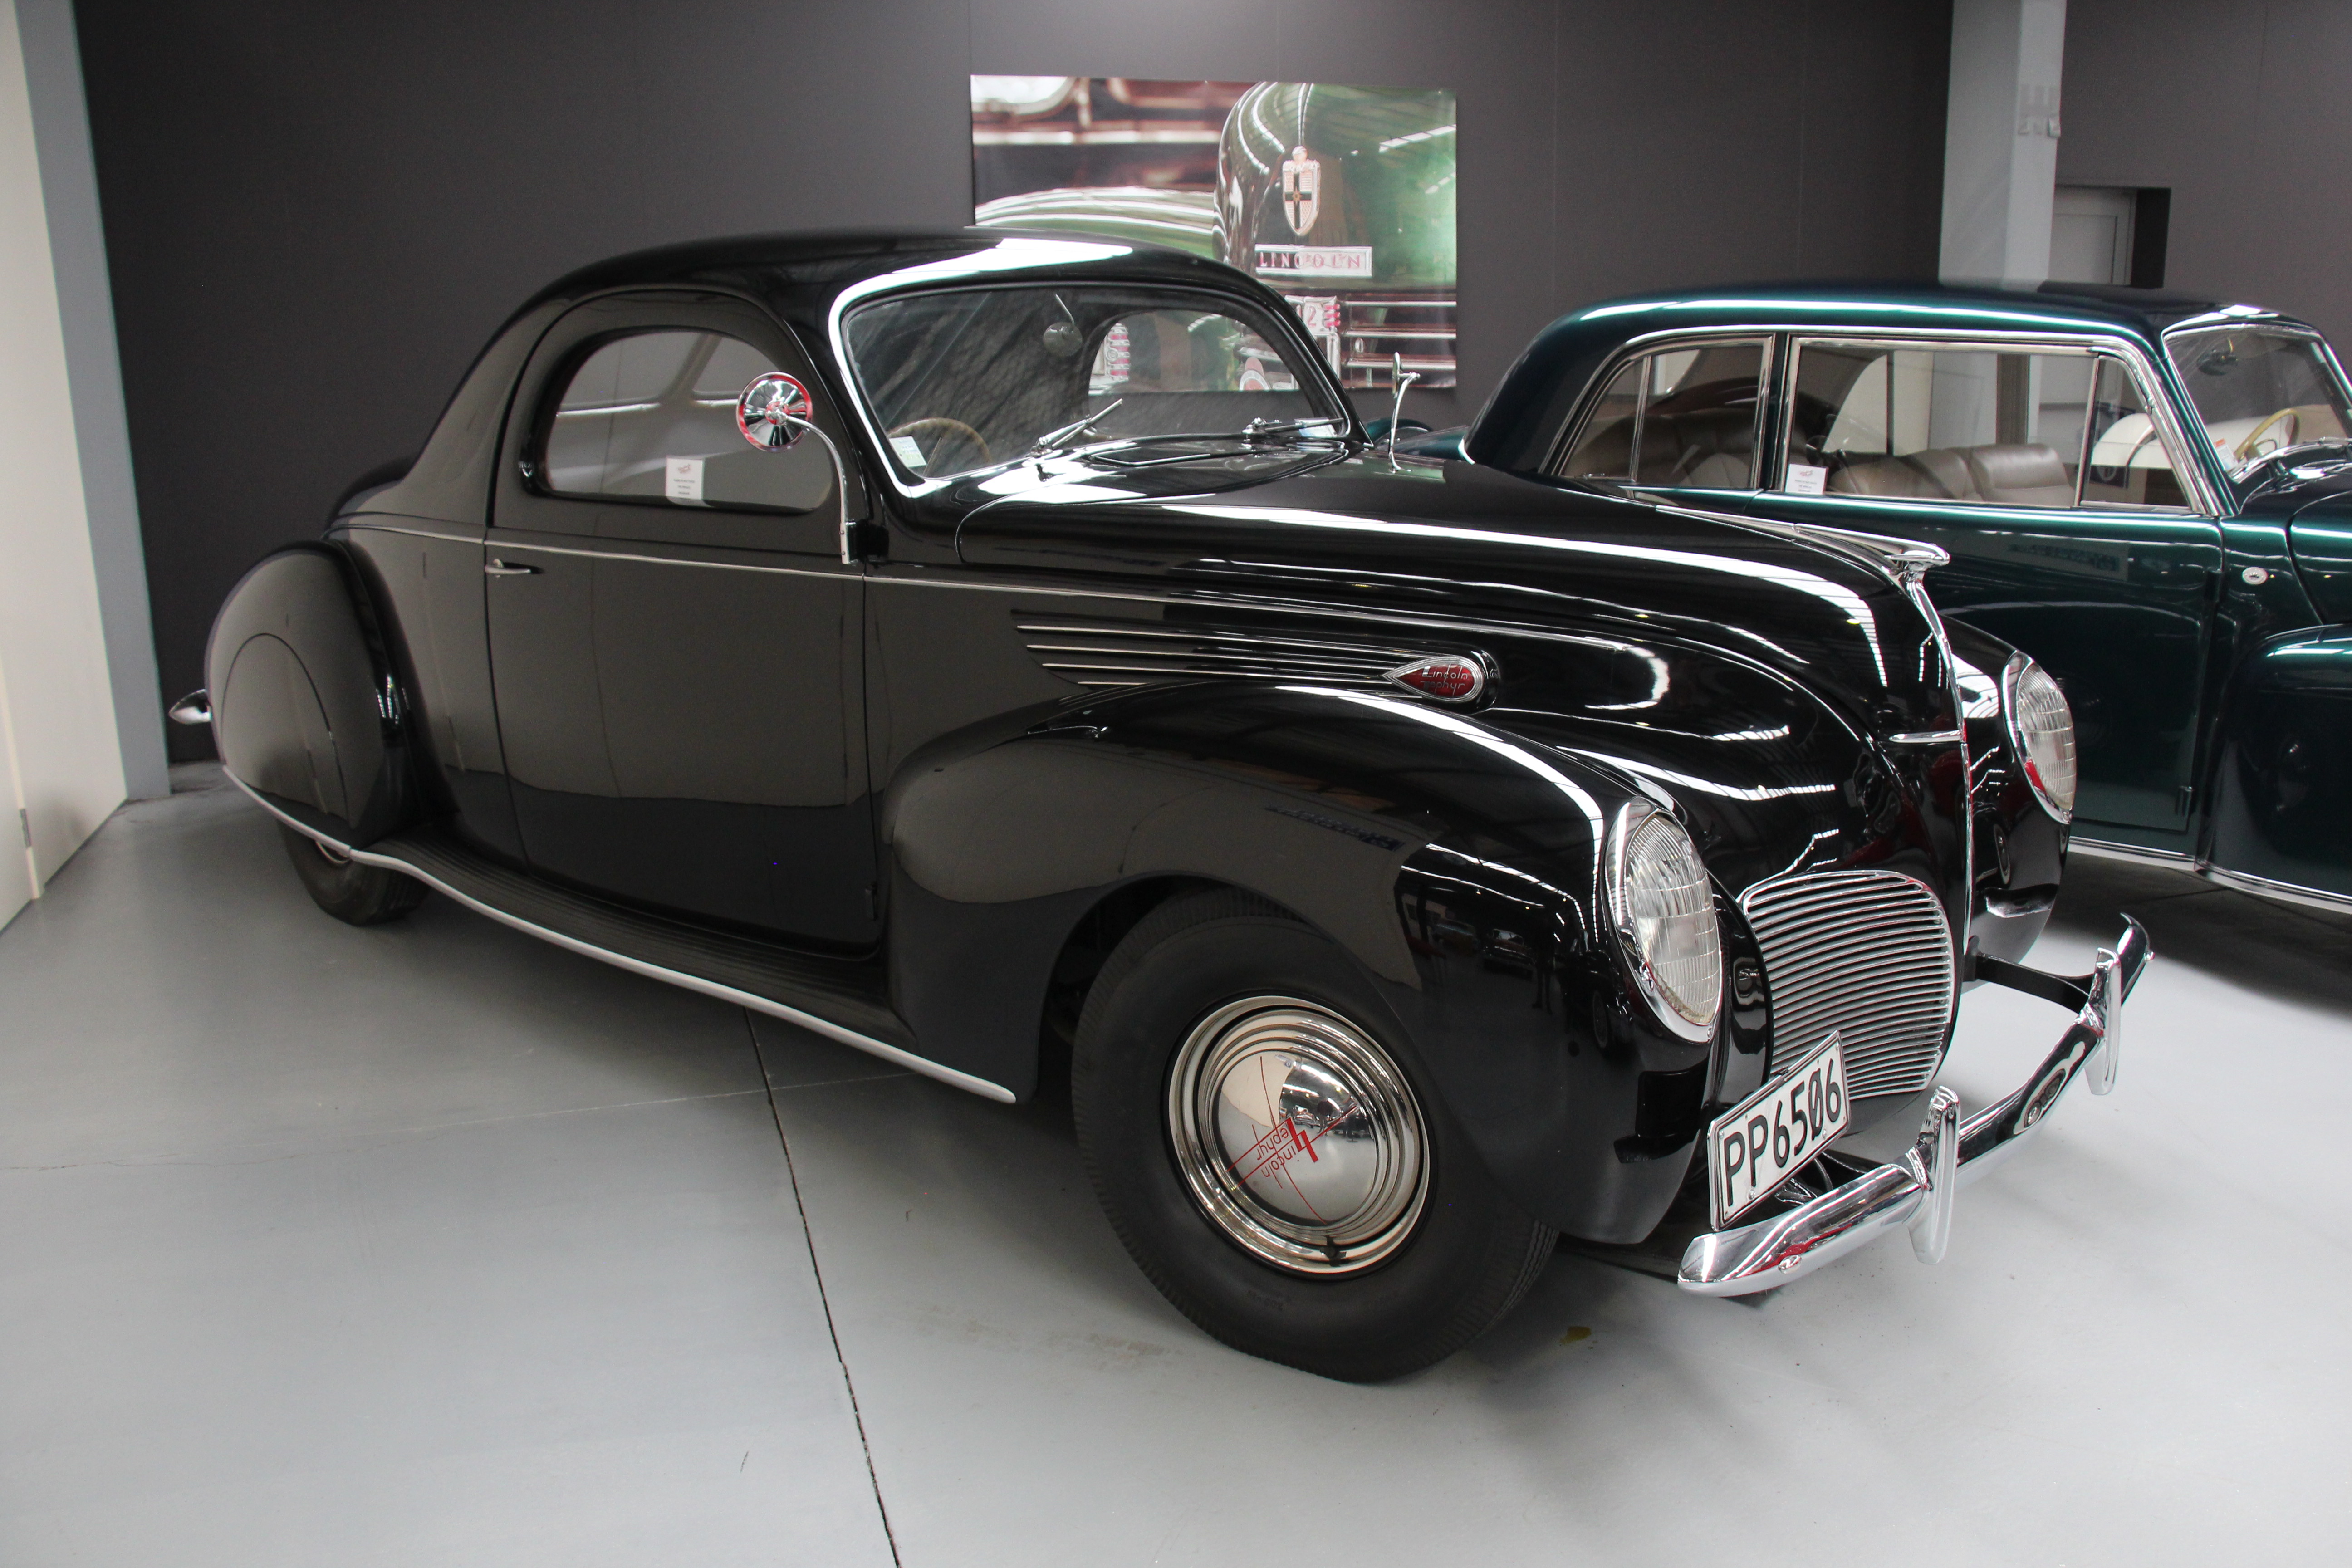 File:1938 Lincoln Zephyr Coupe (32768106961).jpg - Wikimedia Commons